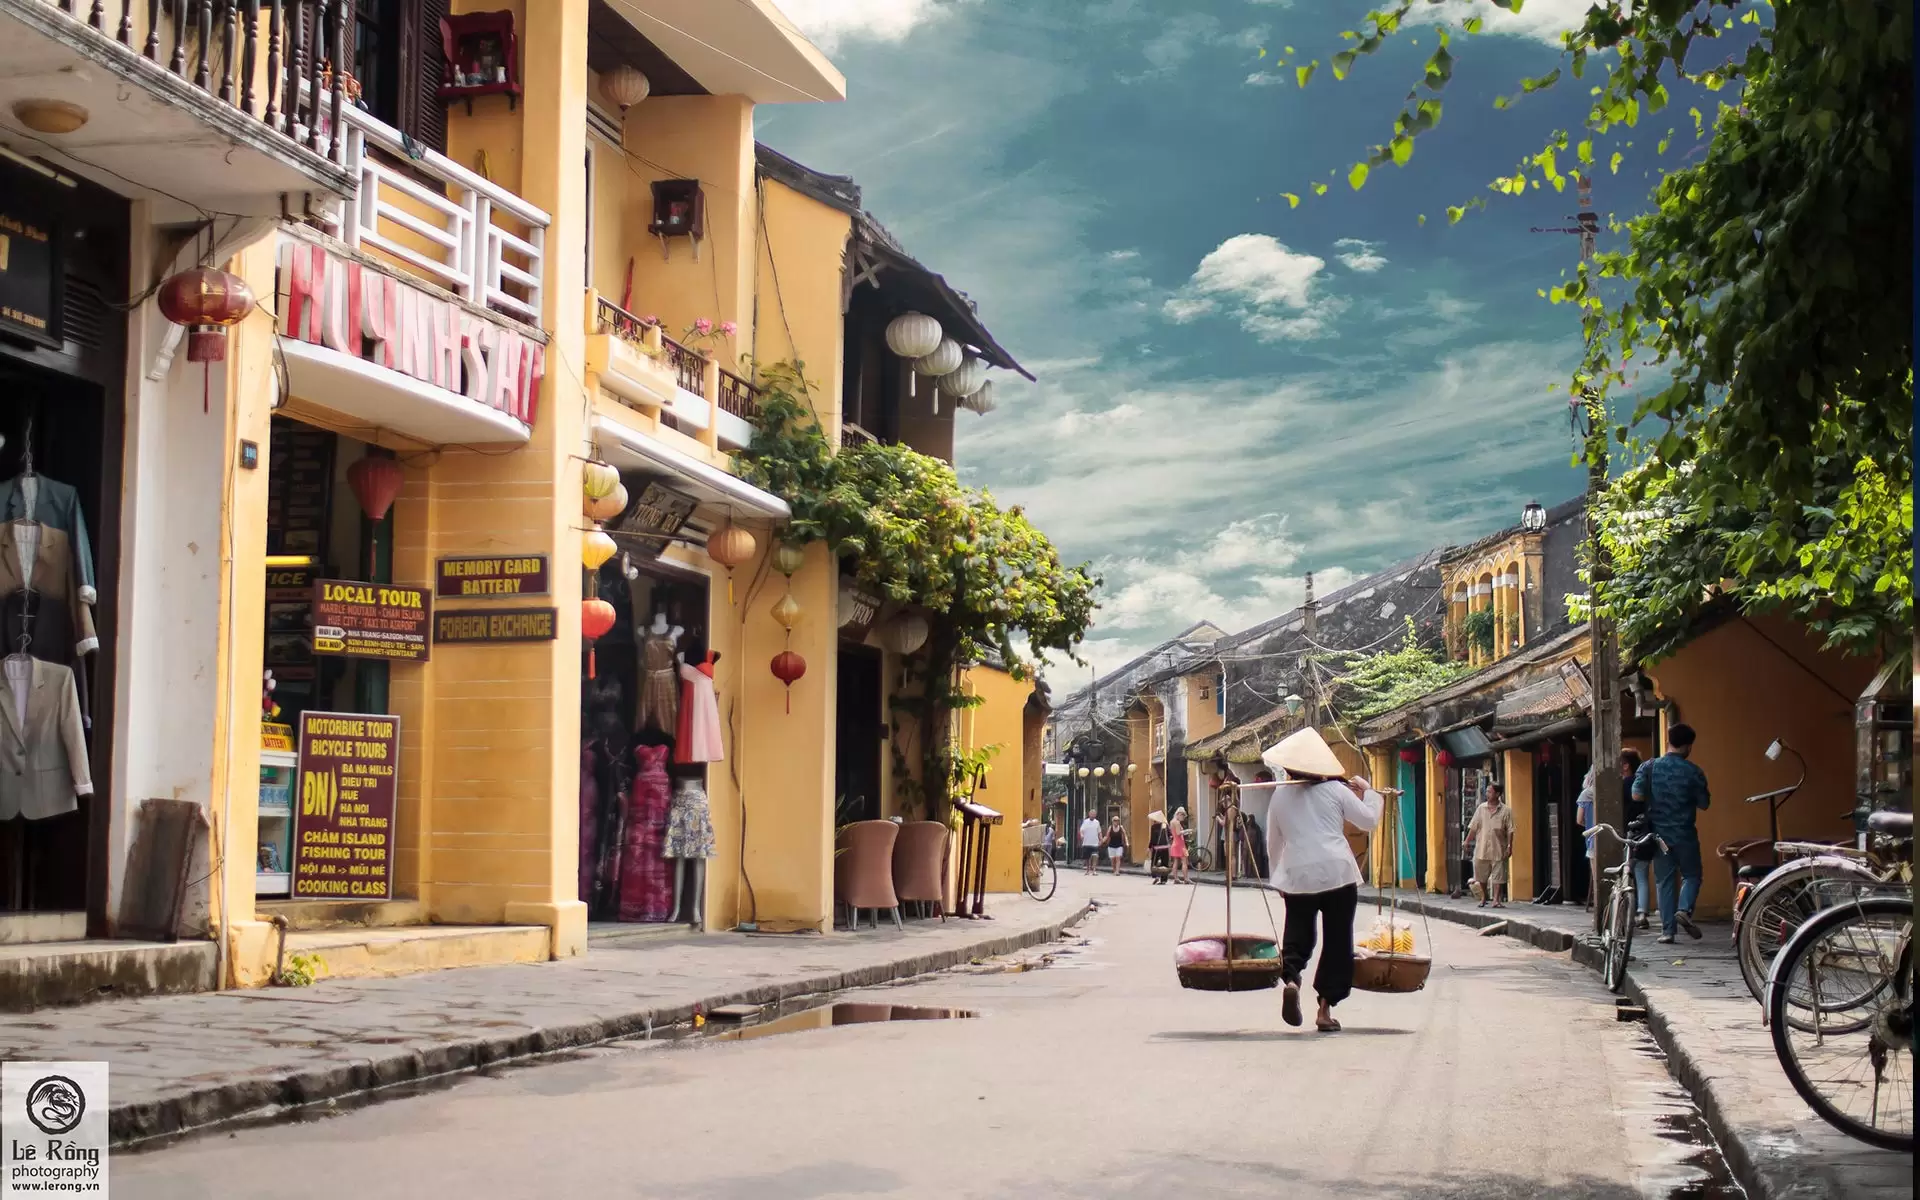 Typical yellow houses in Hoi An Ancient Town